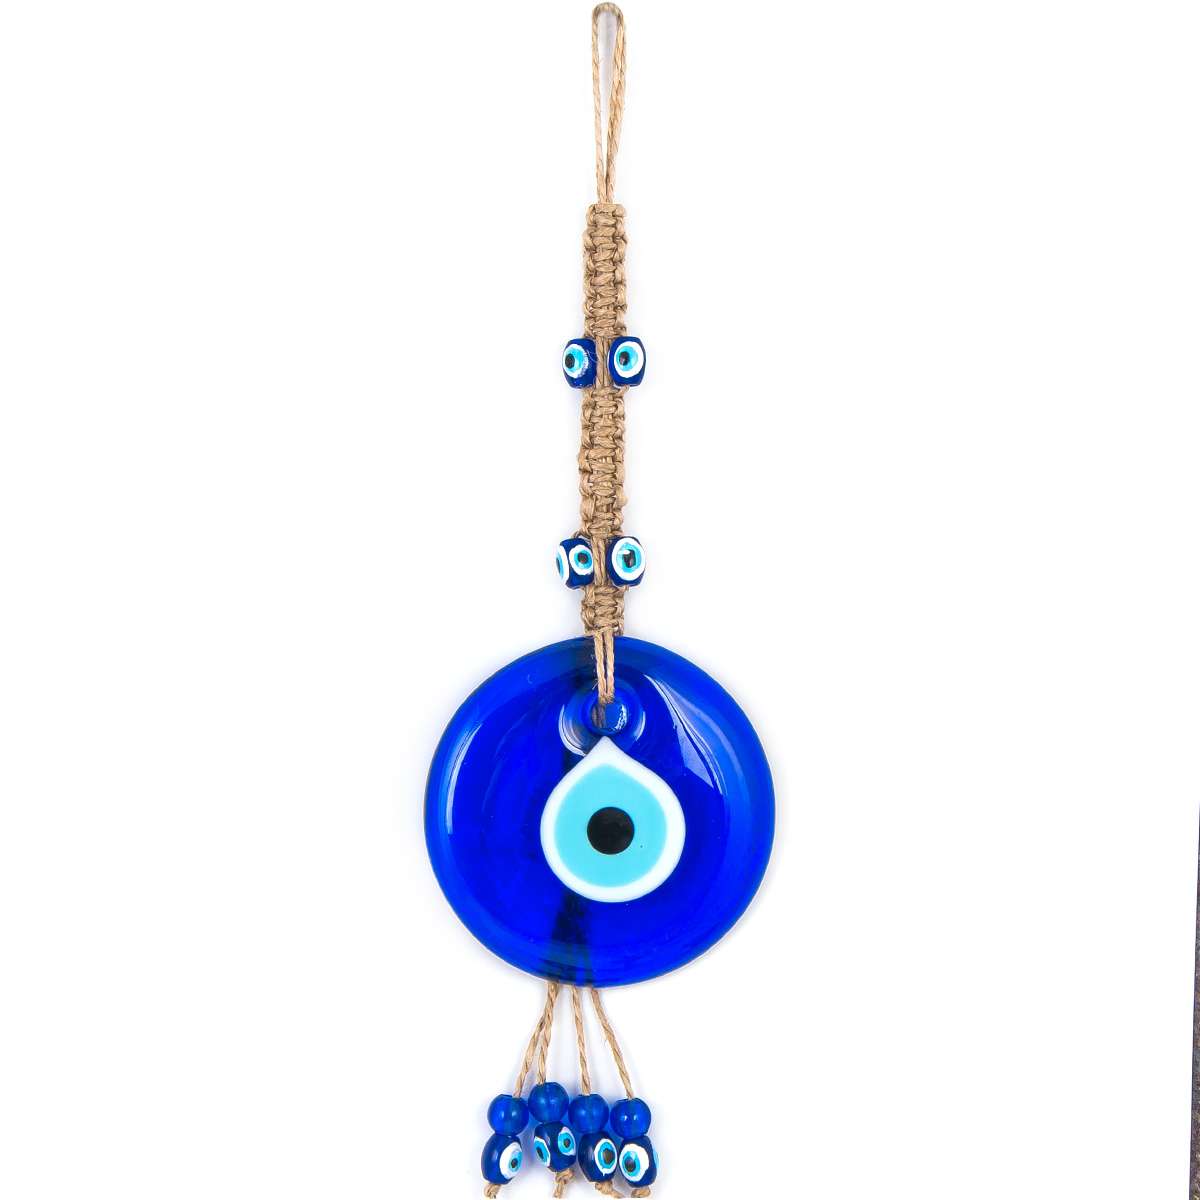 Flax Yarn Knitted Evil Eye Glass Wall Hanging 4"in